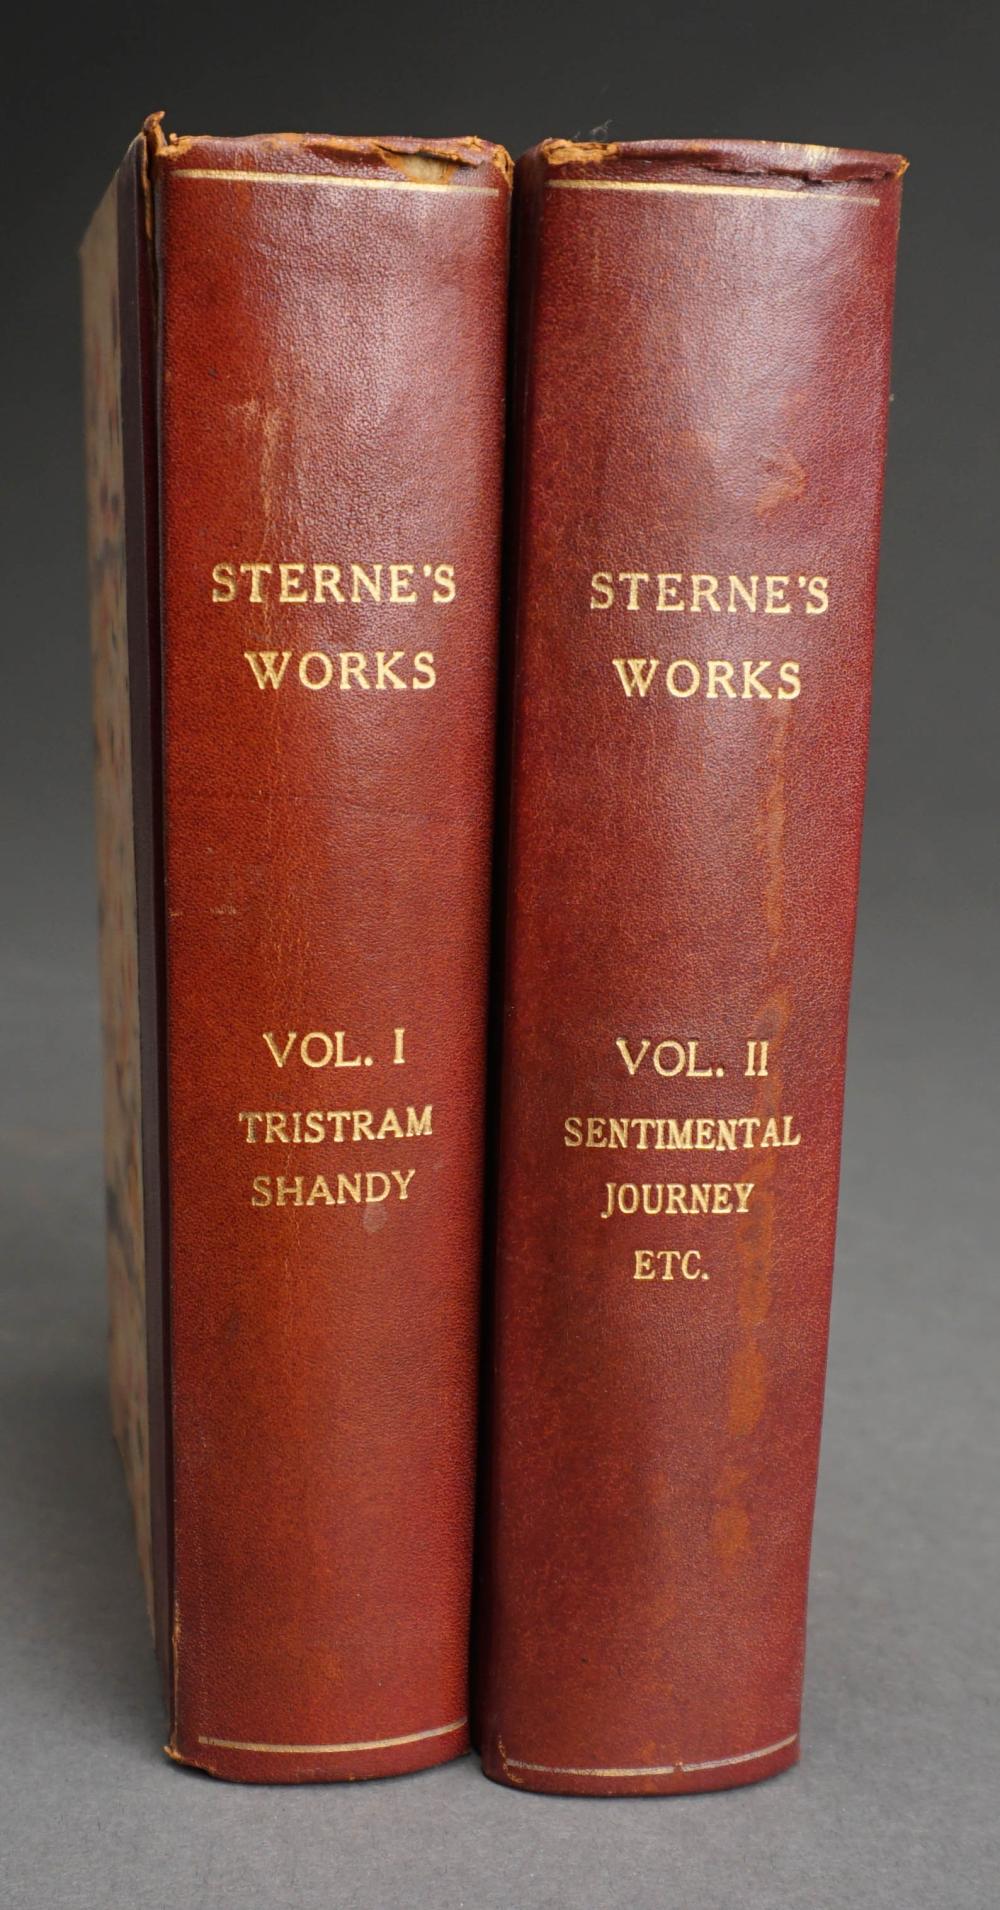 THE WORKS OF LAURENCE STERNE PUBLISHED 2e4fed